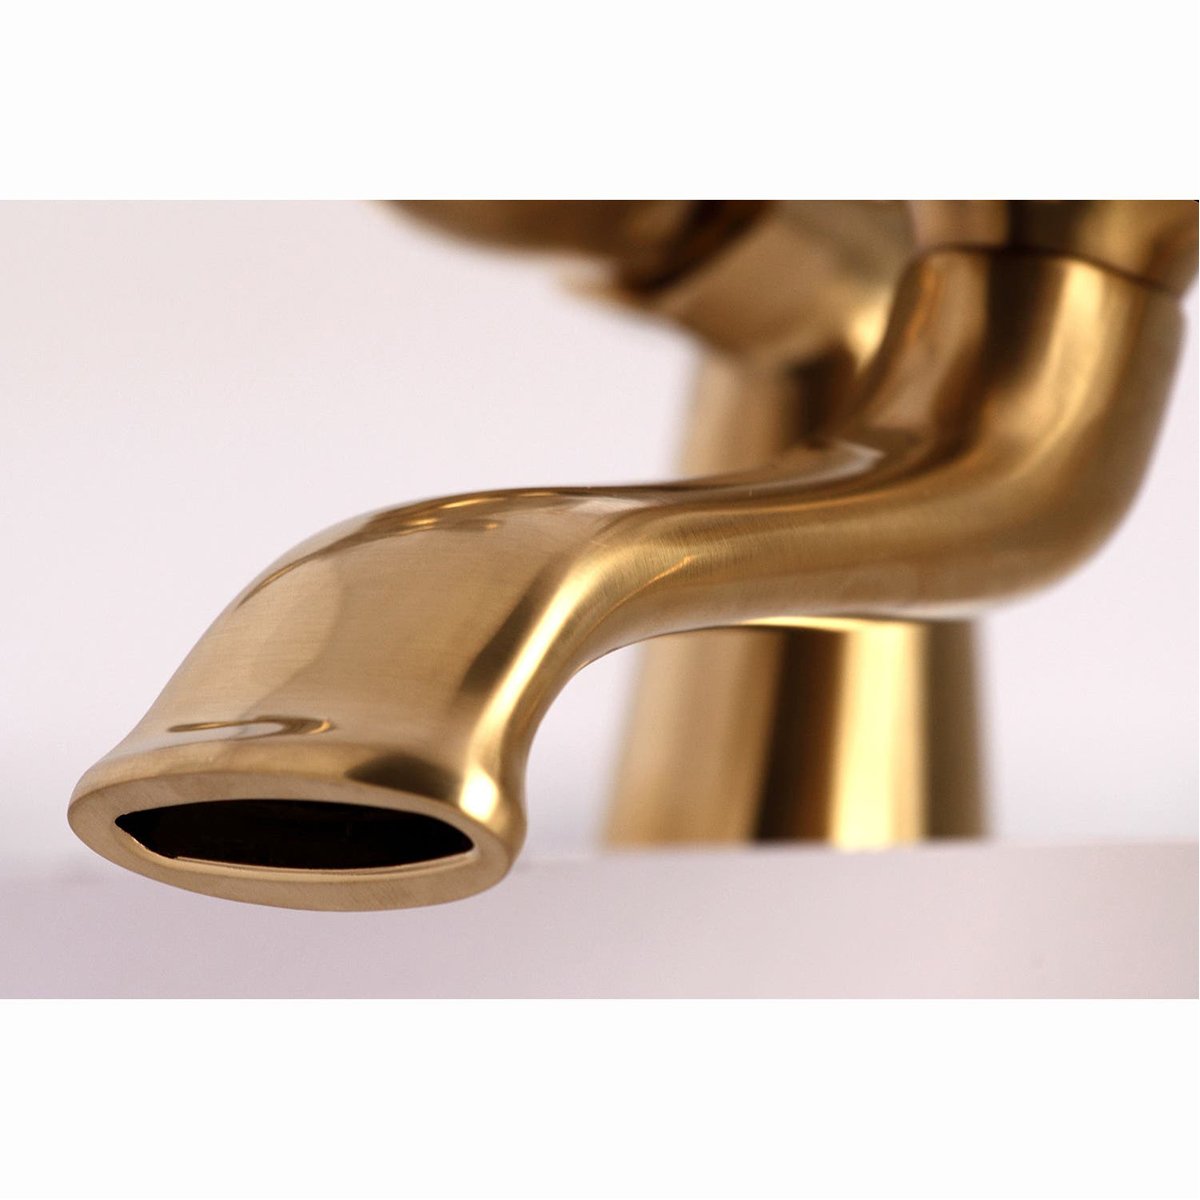 Kingston Brass Deck Mount Clawfoot Tub Faucet with Hand Shower